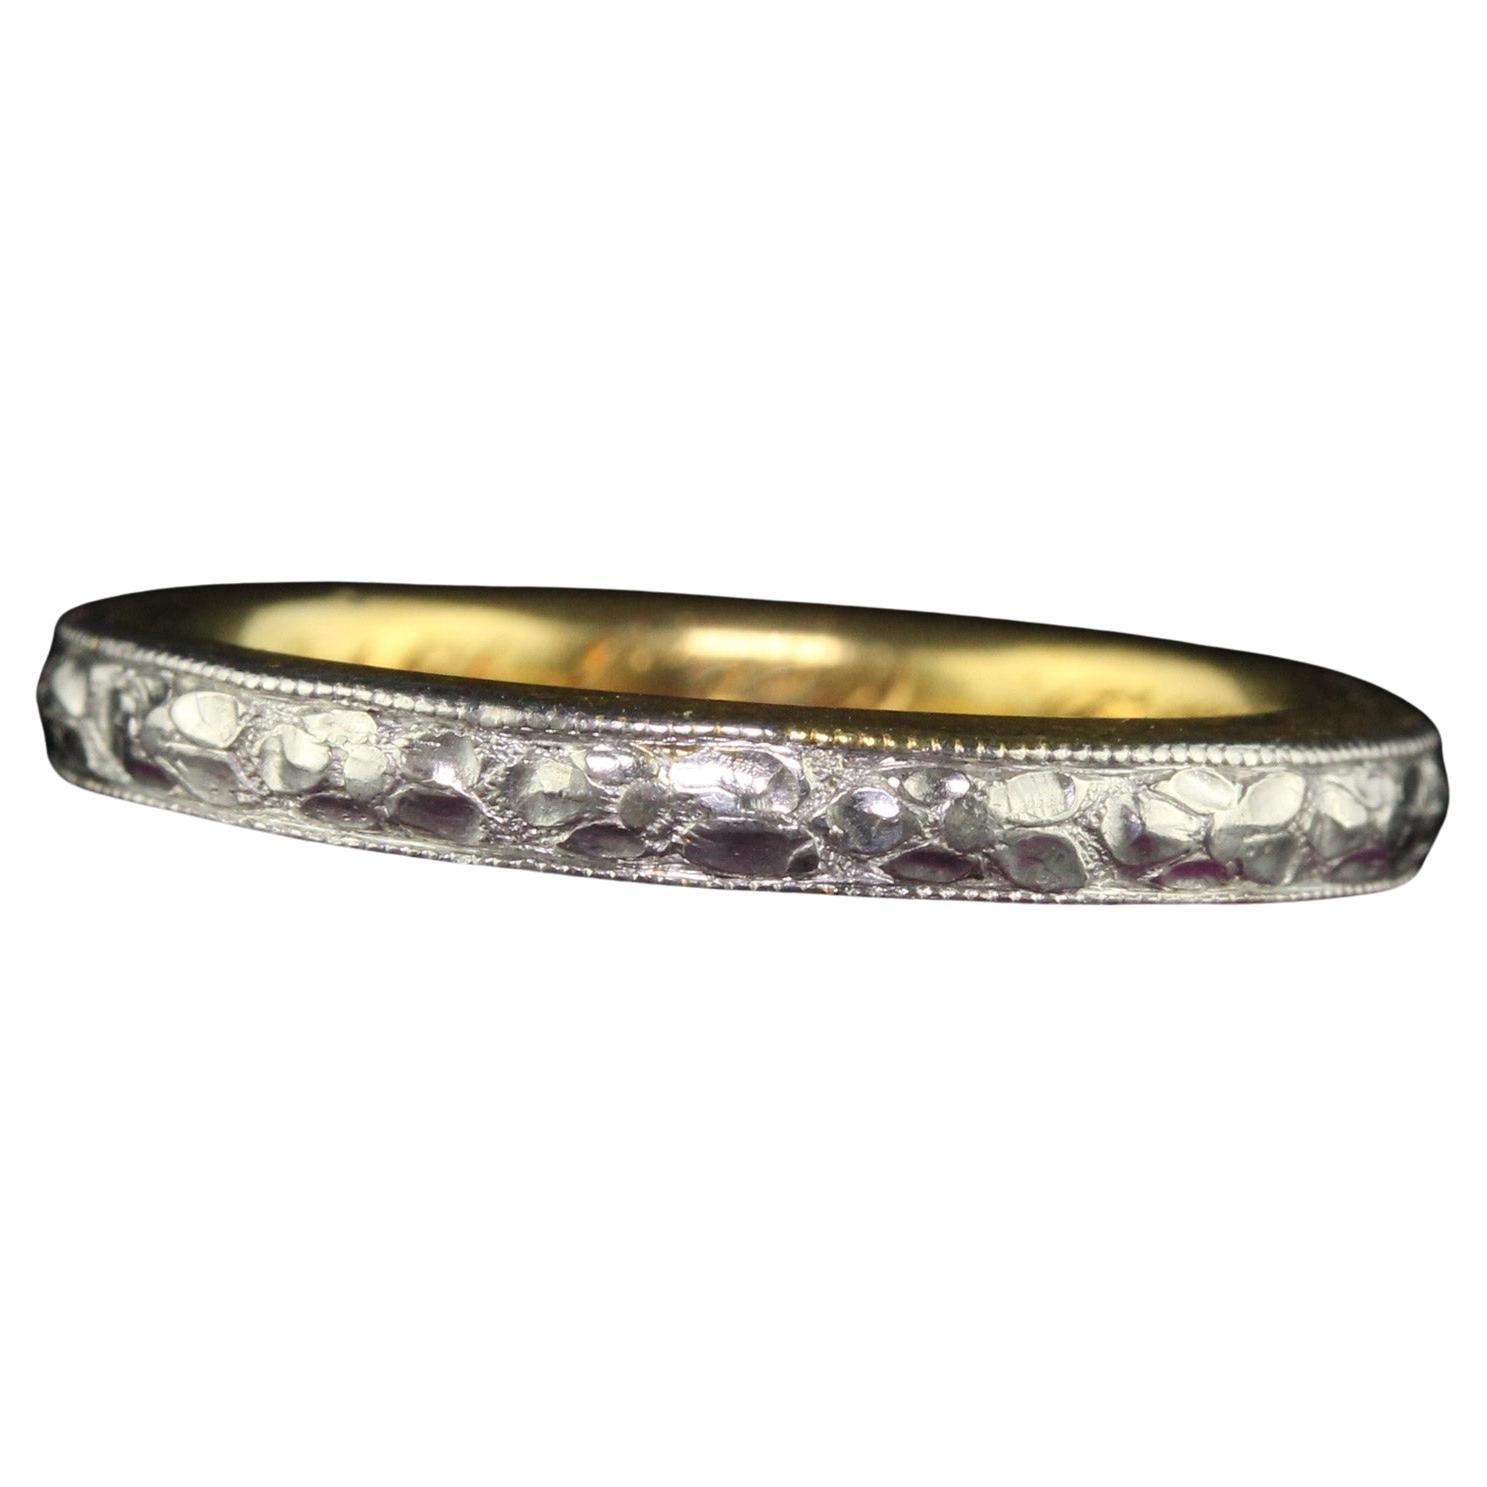 Antique Art Deco Platinum and 18K Gold Engraved Wedding Band Circa 1917 - Size 5 For Sale